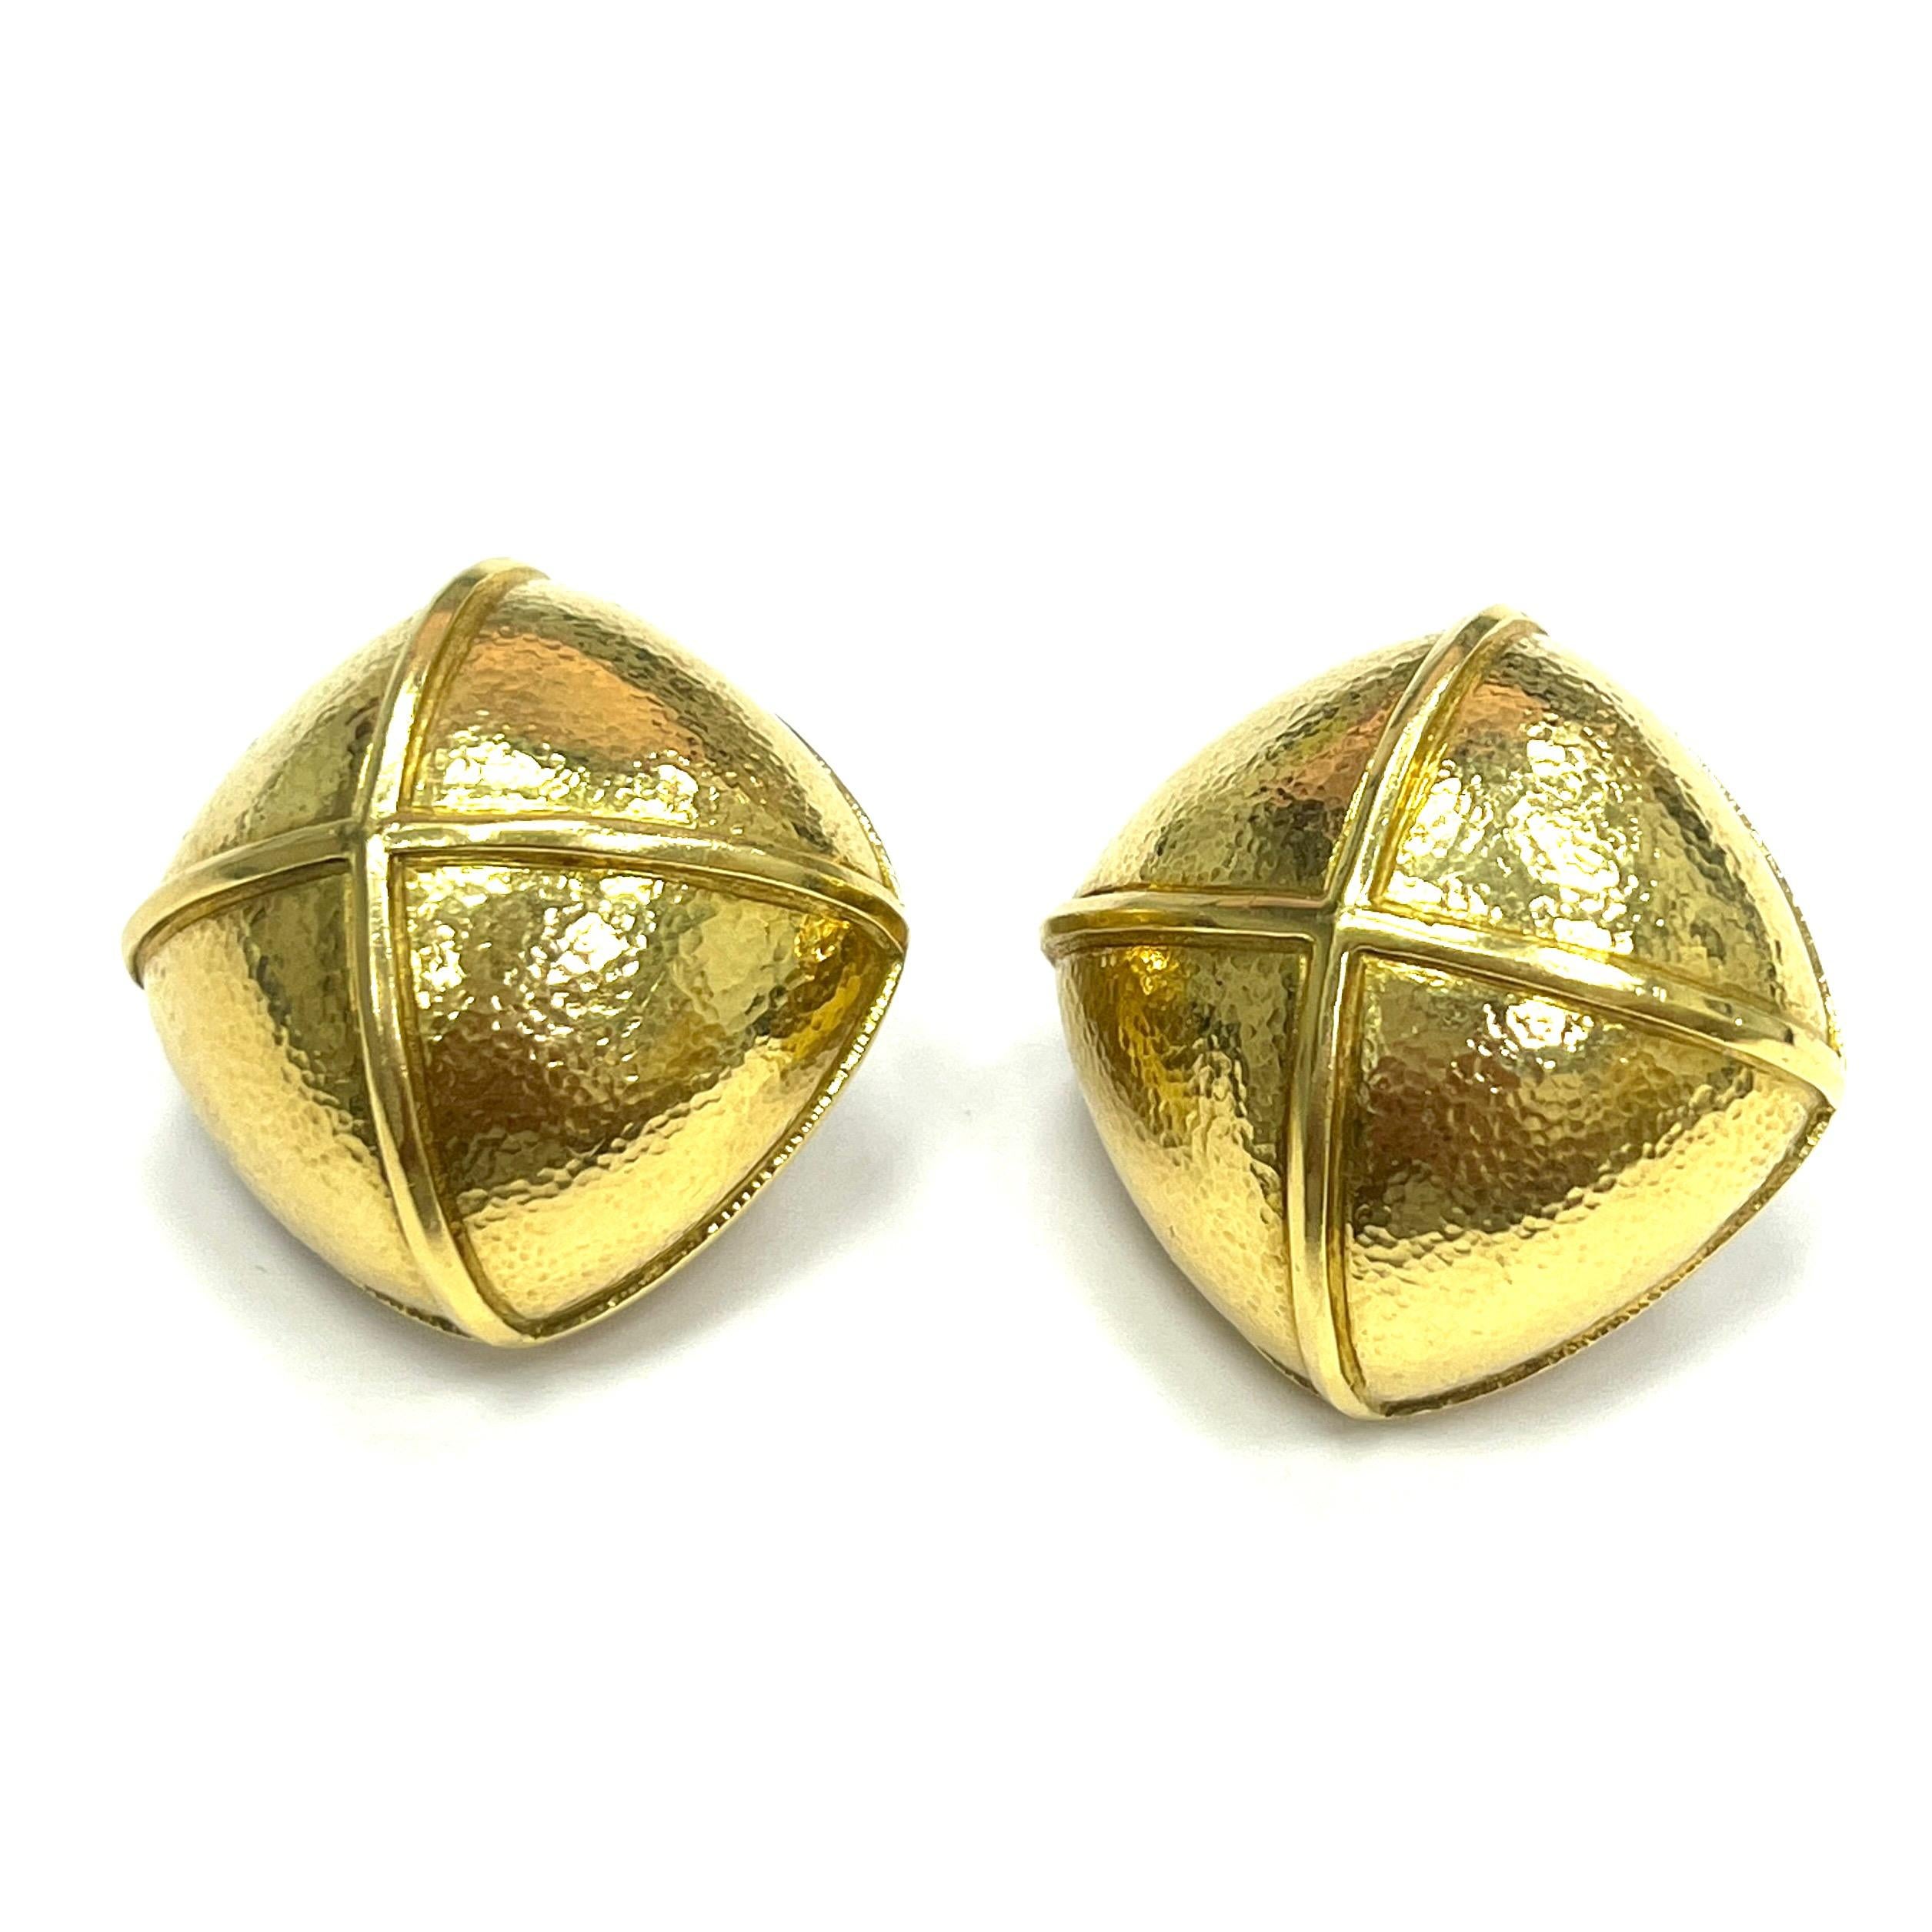 David Webb Hammered 18k Yellow Gold X Ear Clips

Softly hammered 18 karat yellow gold, with X motif; marked Webb, 18k

Size: width 2.8 cm, length 2.8 cm
Total weight: 47.7 grams